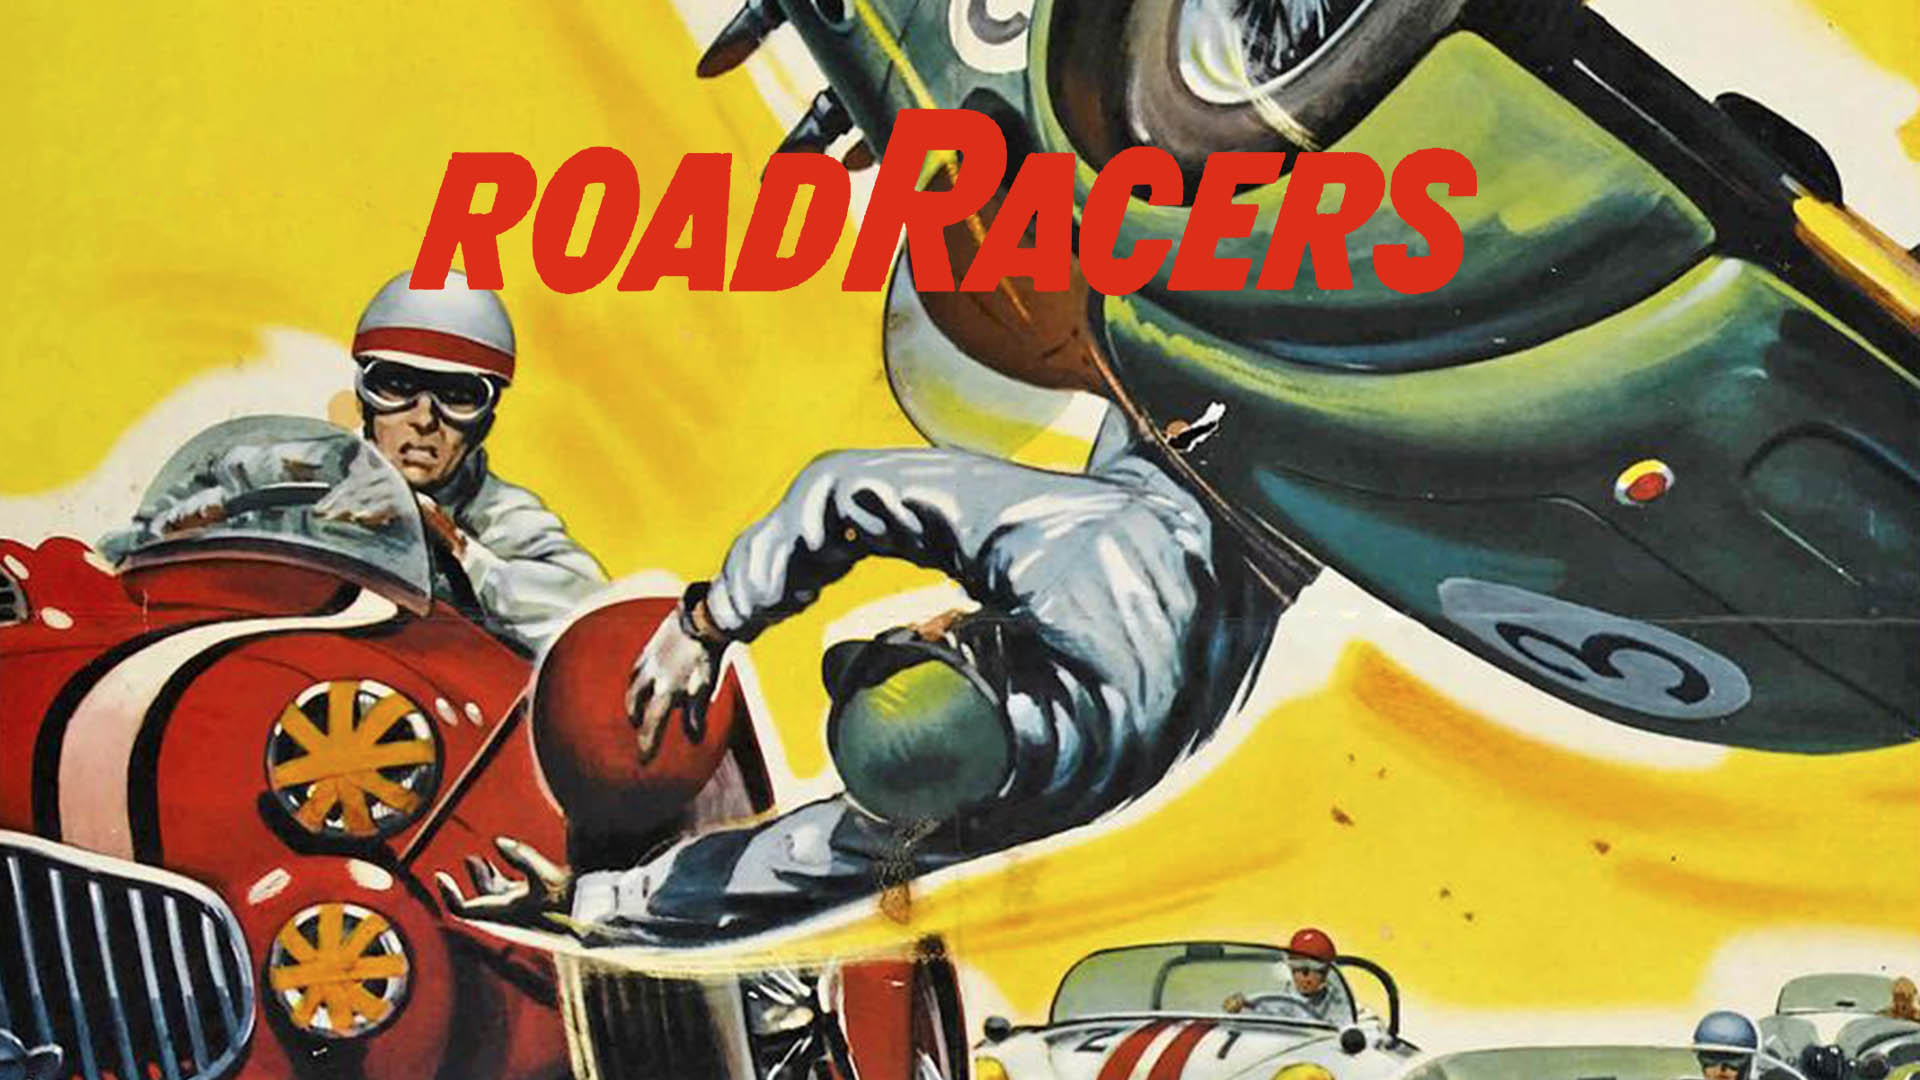 Watch The Roadracers Online | Stream Full Movies